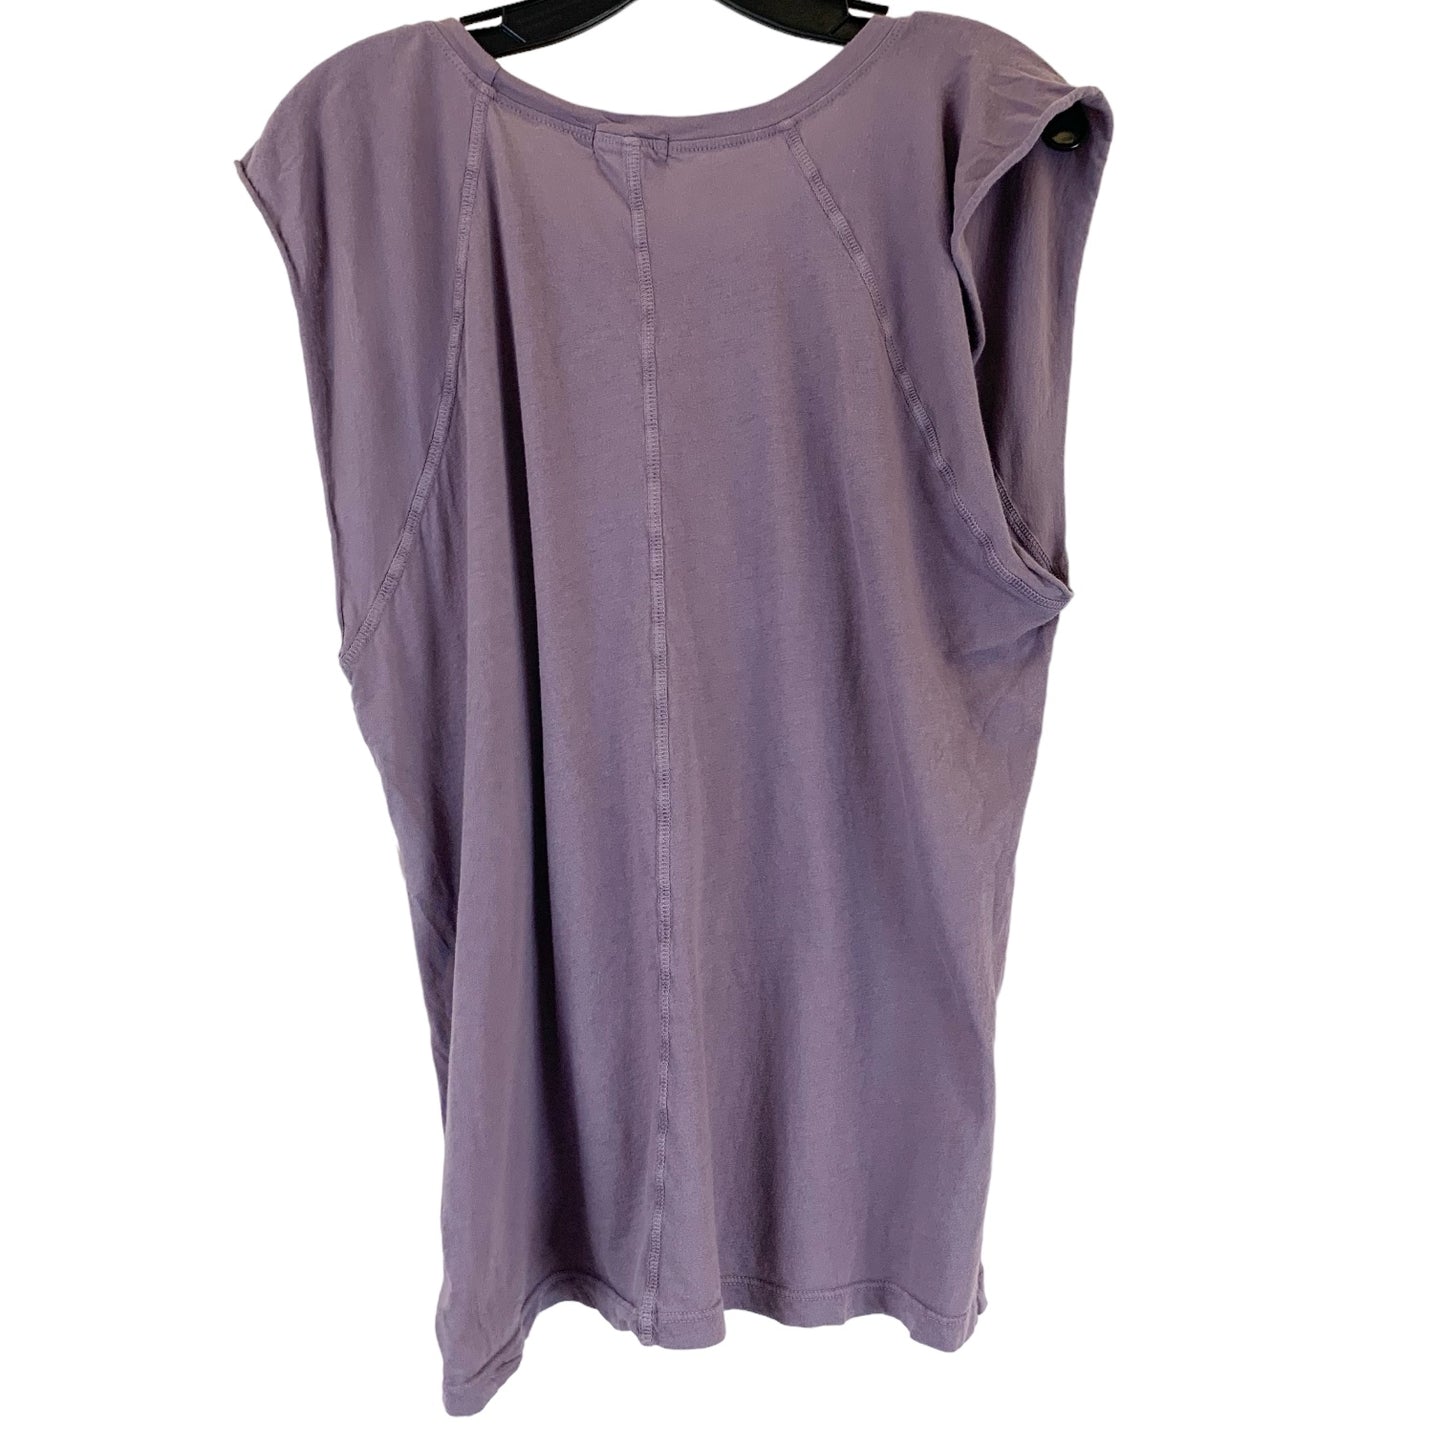 Top Short Sleeve Basic By La Made  Size: L